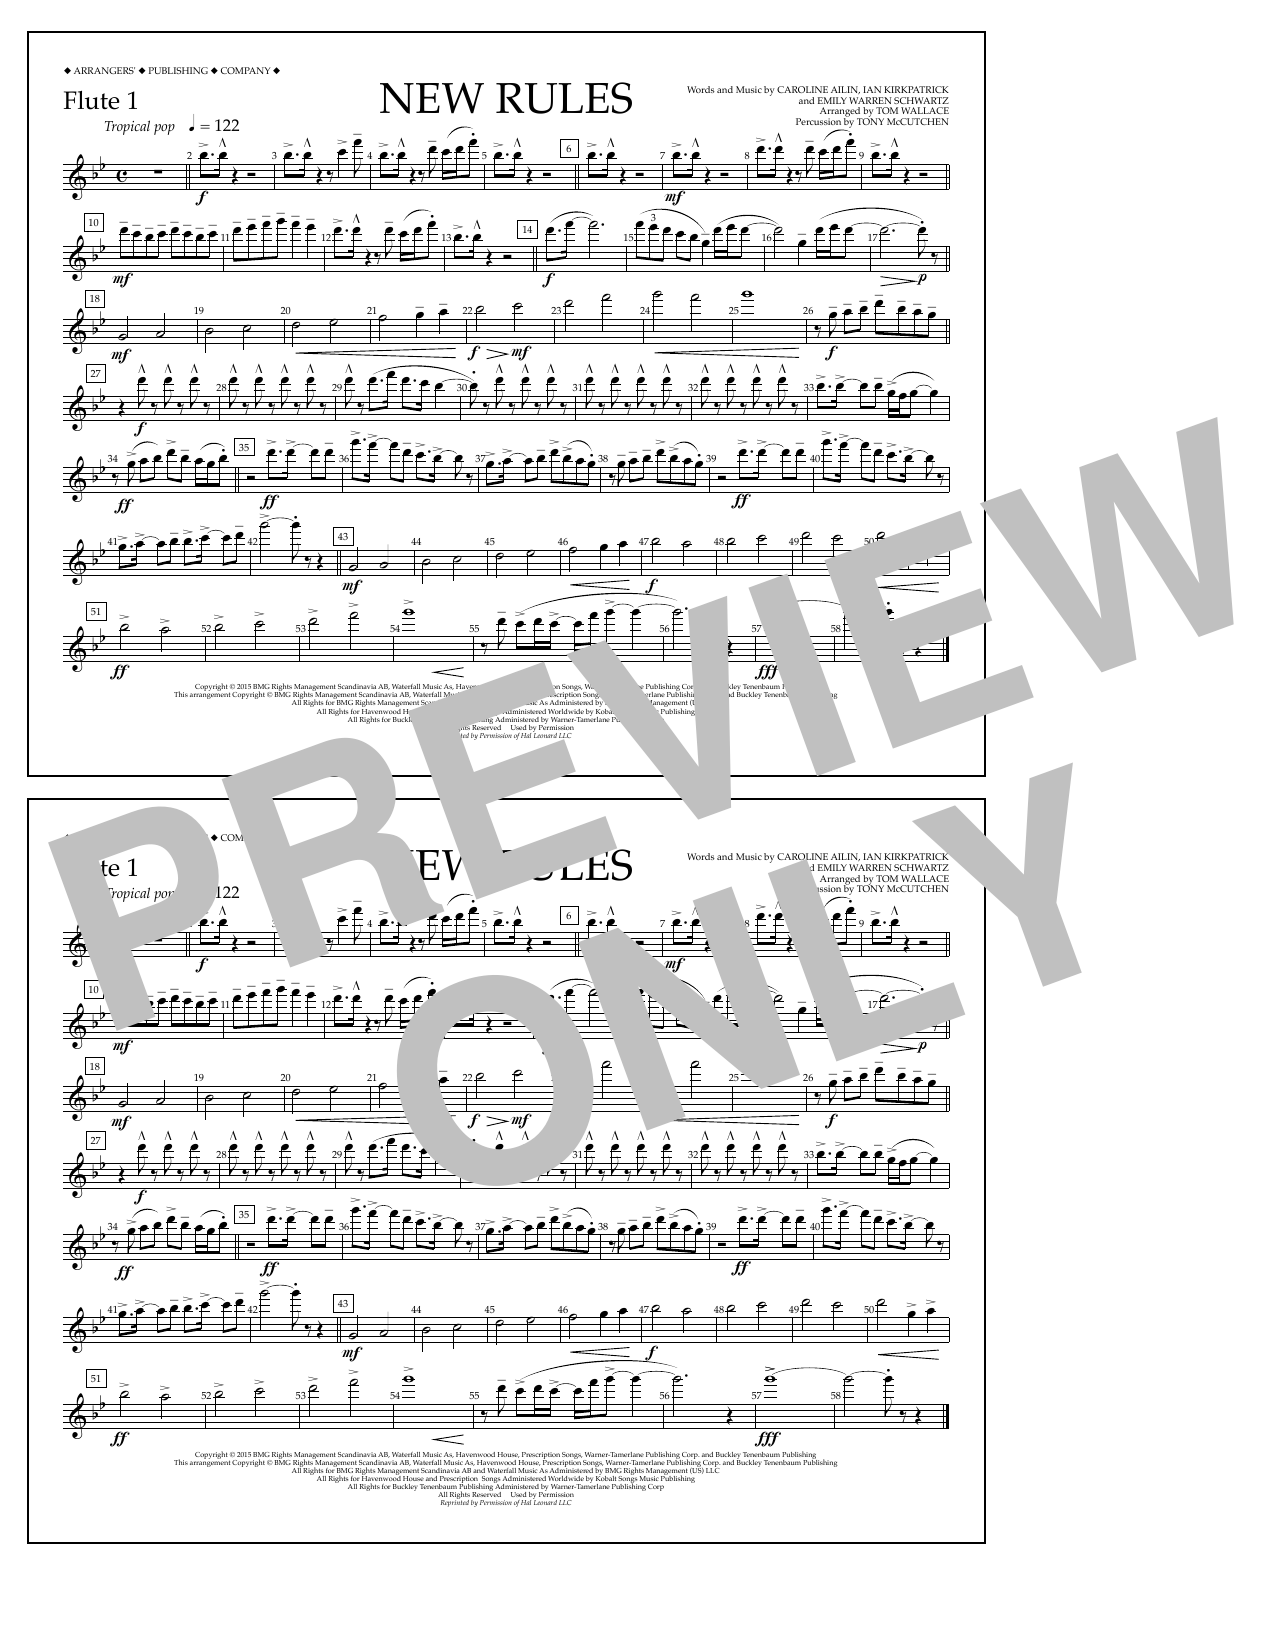 Download Tom Wallace New Rules - Flute 1 Sheet Music